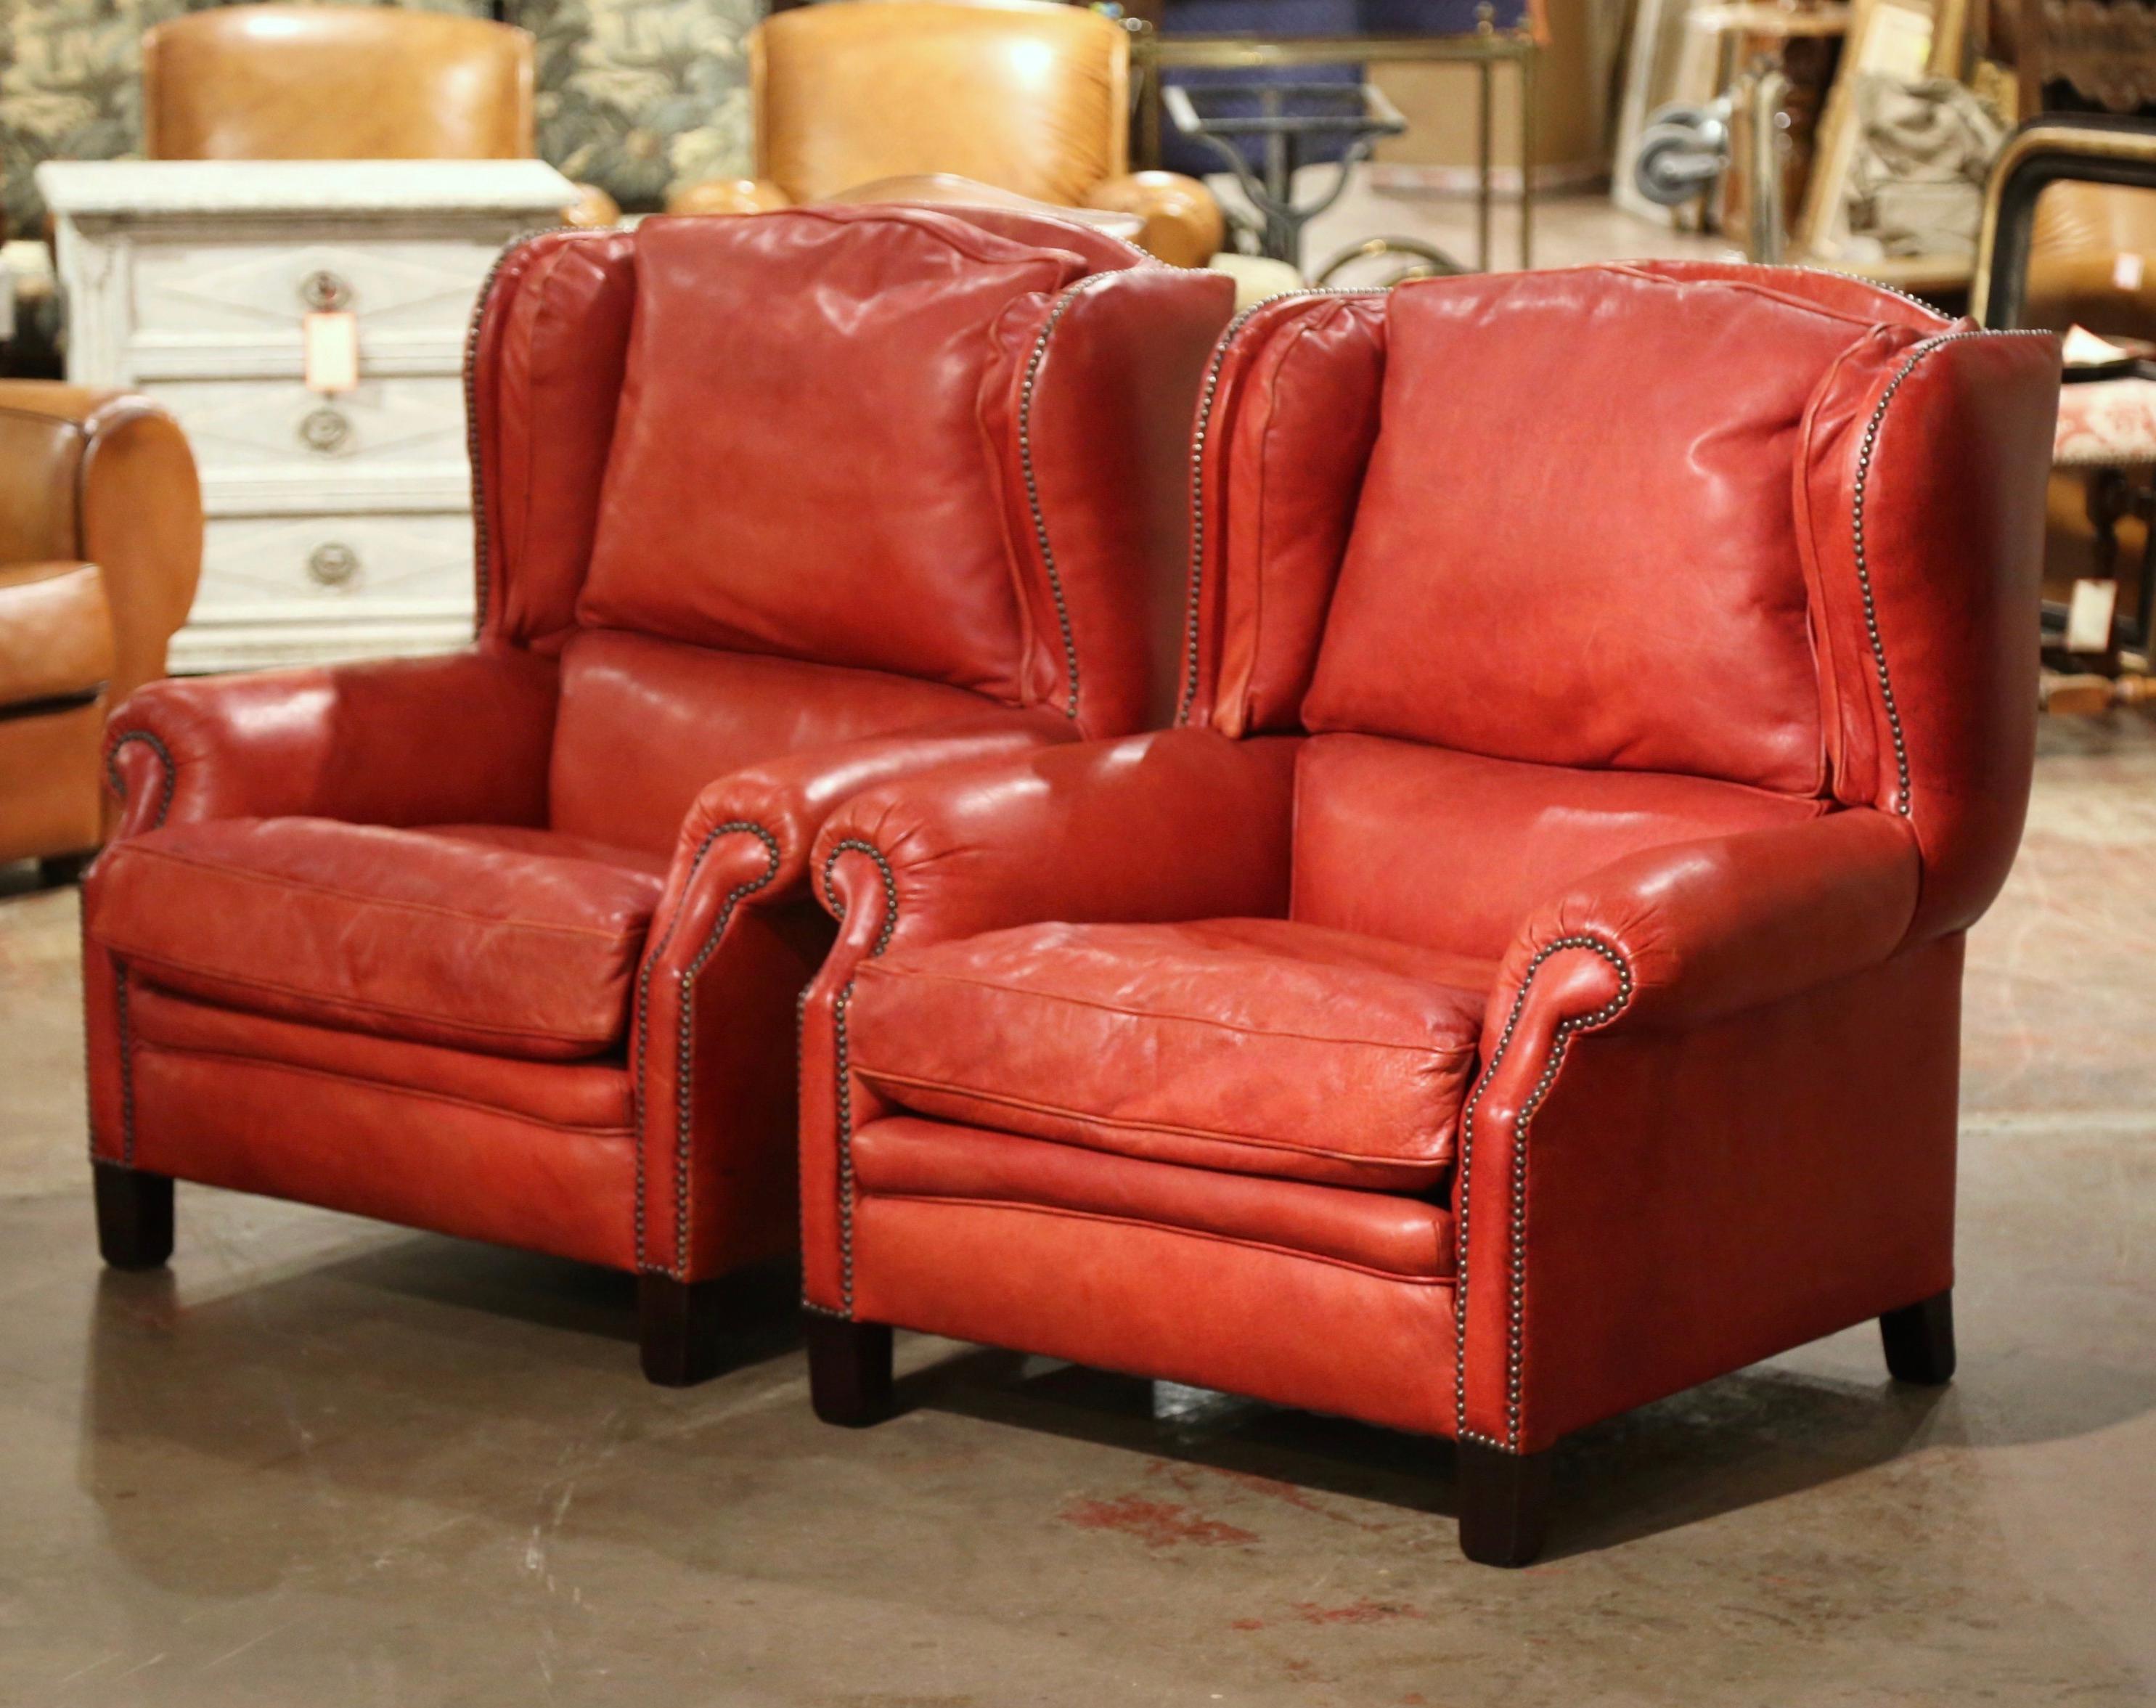 Pair of Mid-Century French Red Leather Wing Back Club Armchairs with Nail Heads In Excellent Condition For Sale In Dallas, TX